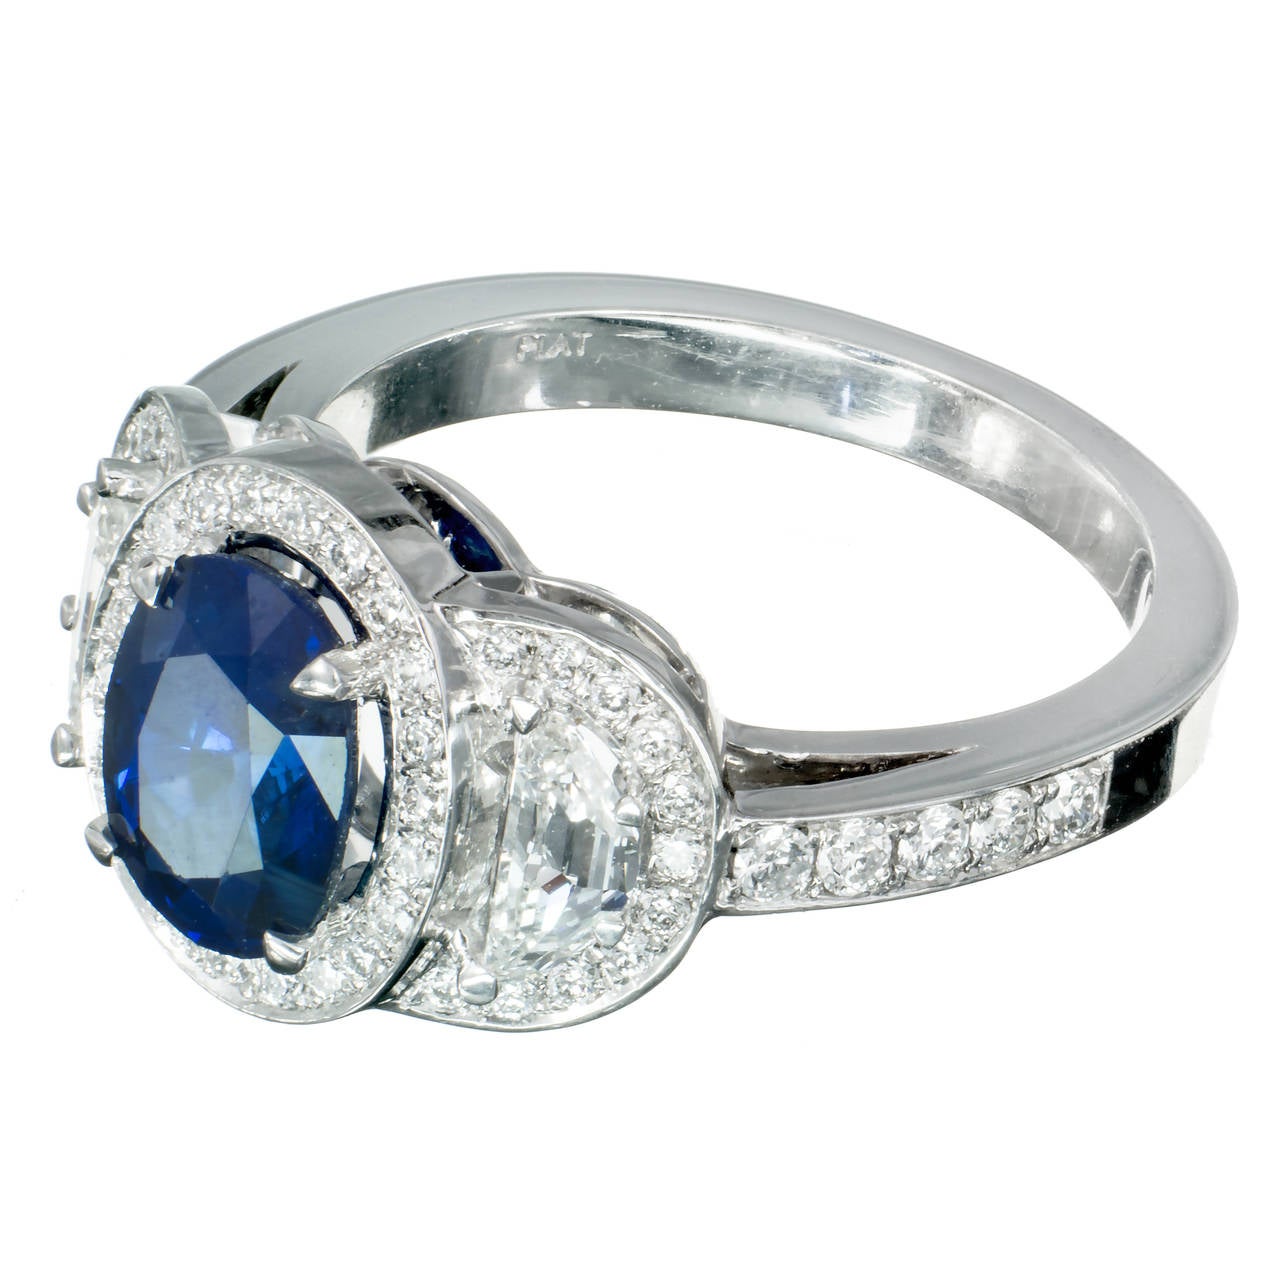 Blue oval Sapphire 1.89cts, GIA certified natural corundum simple heat. The ring was designed with old step cut half-moon diamonds to go with the beautiful estate Sapphire in a triple halo platinum setting from Peter Suchy Designs. 

1 oval top gem